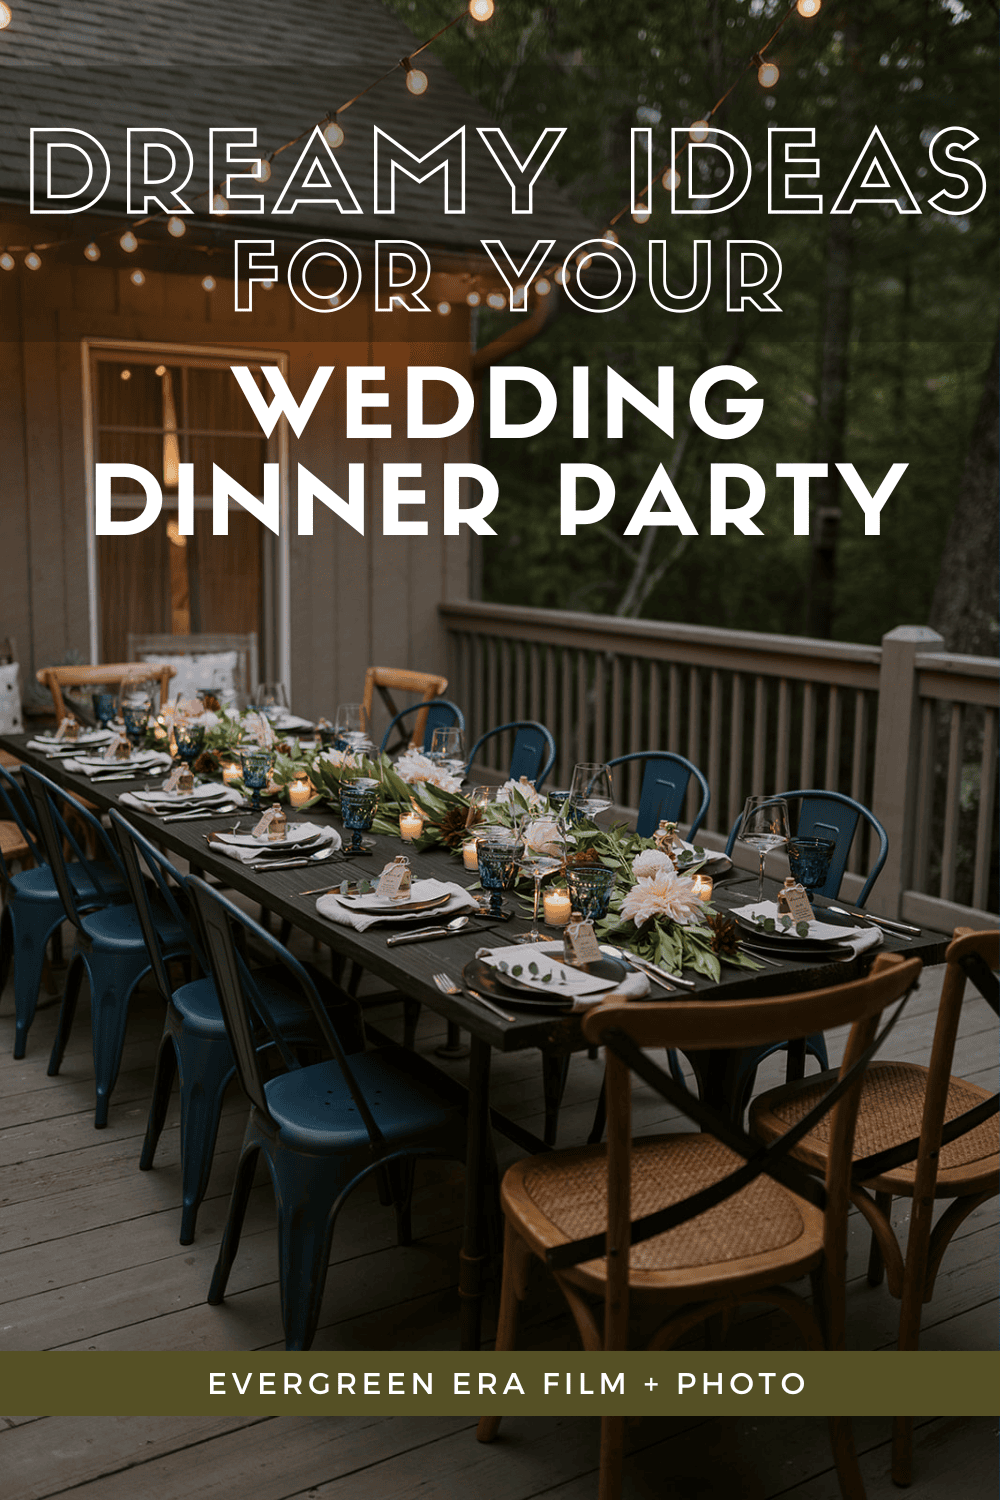 A wedding dinner party set up with string lights on a porch in a forest. There are beautiful colorful flowers and candles with a dark table, blue chairs, and wooden chairs.